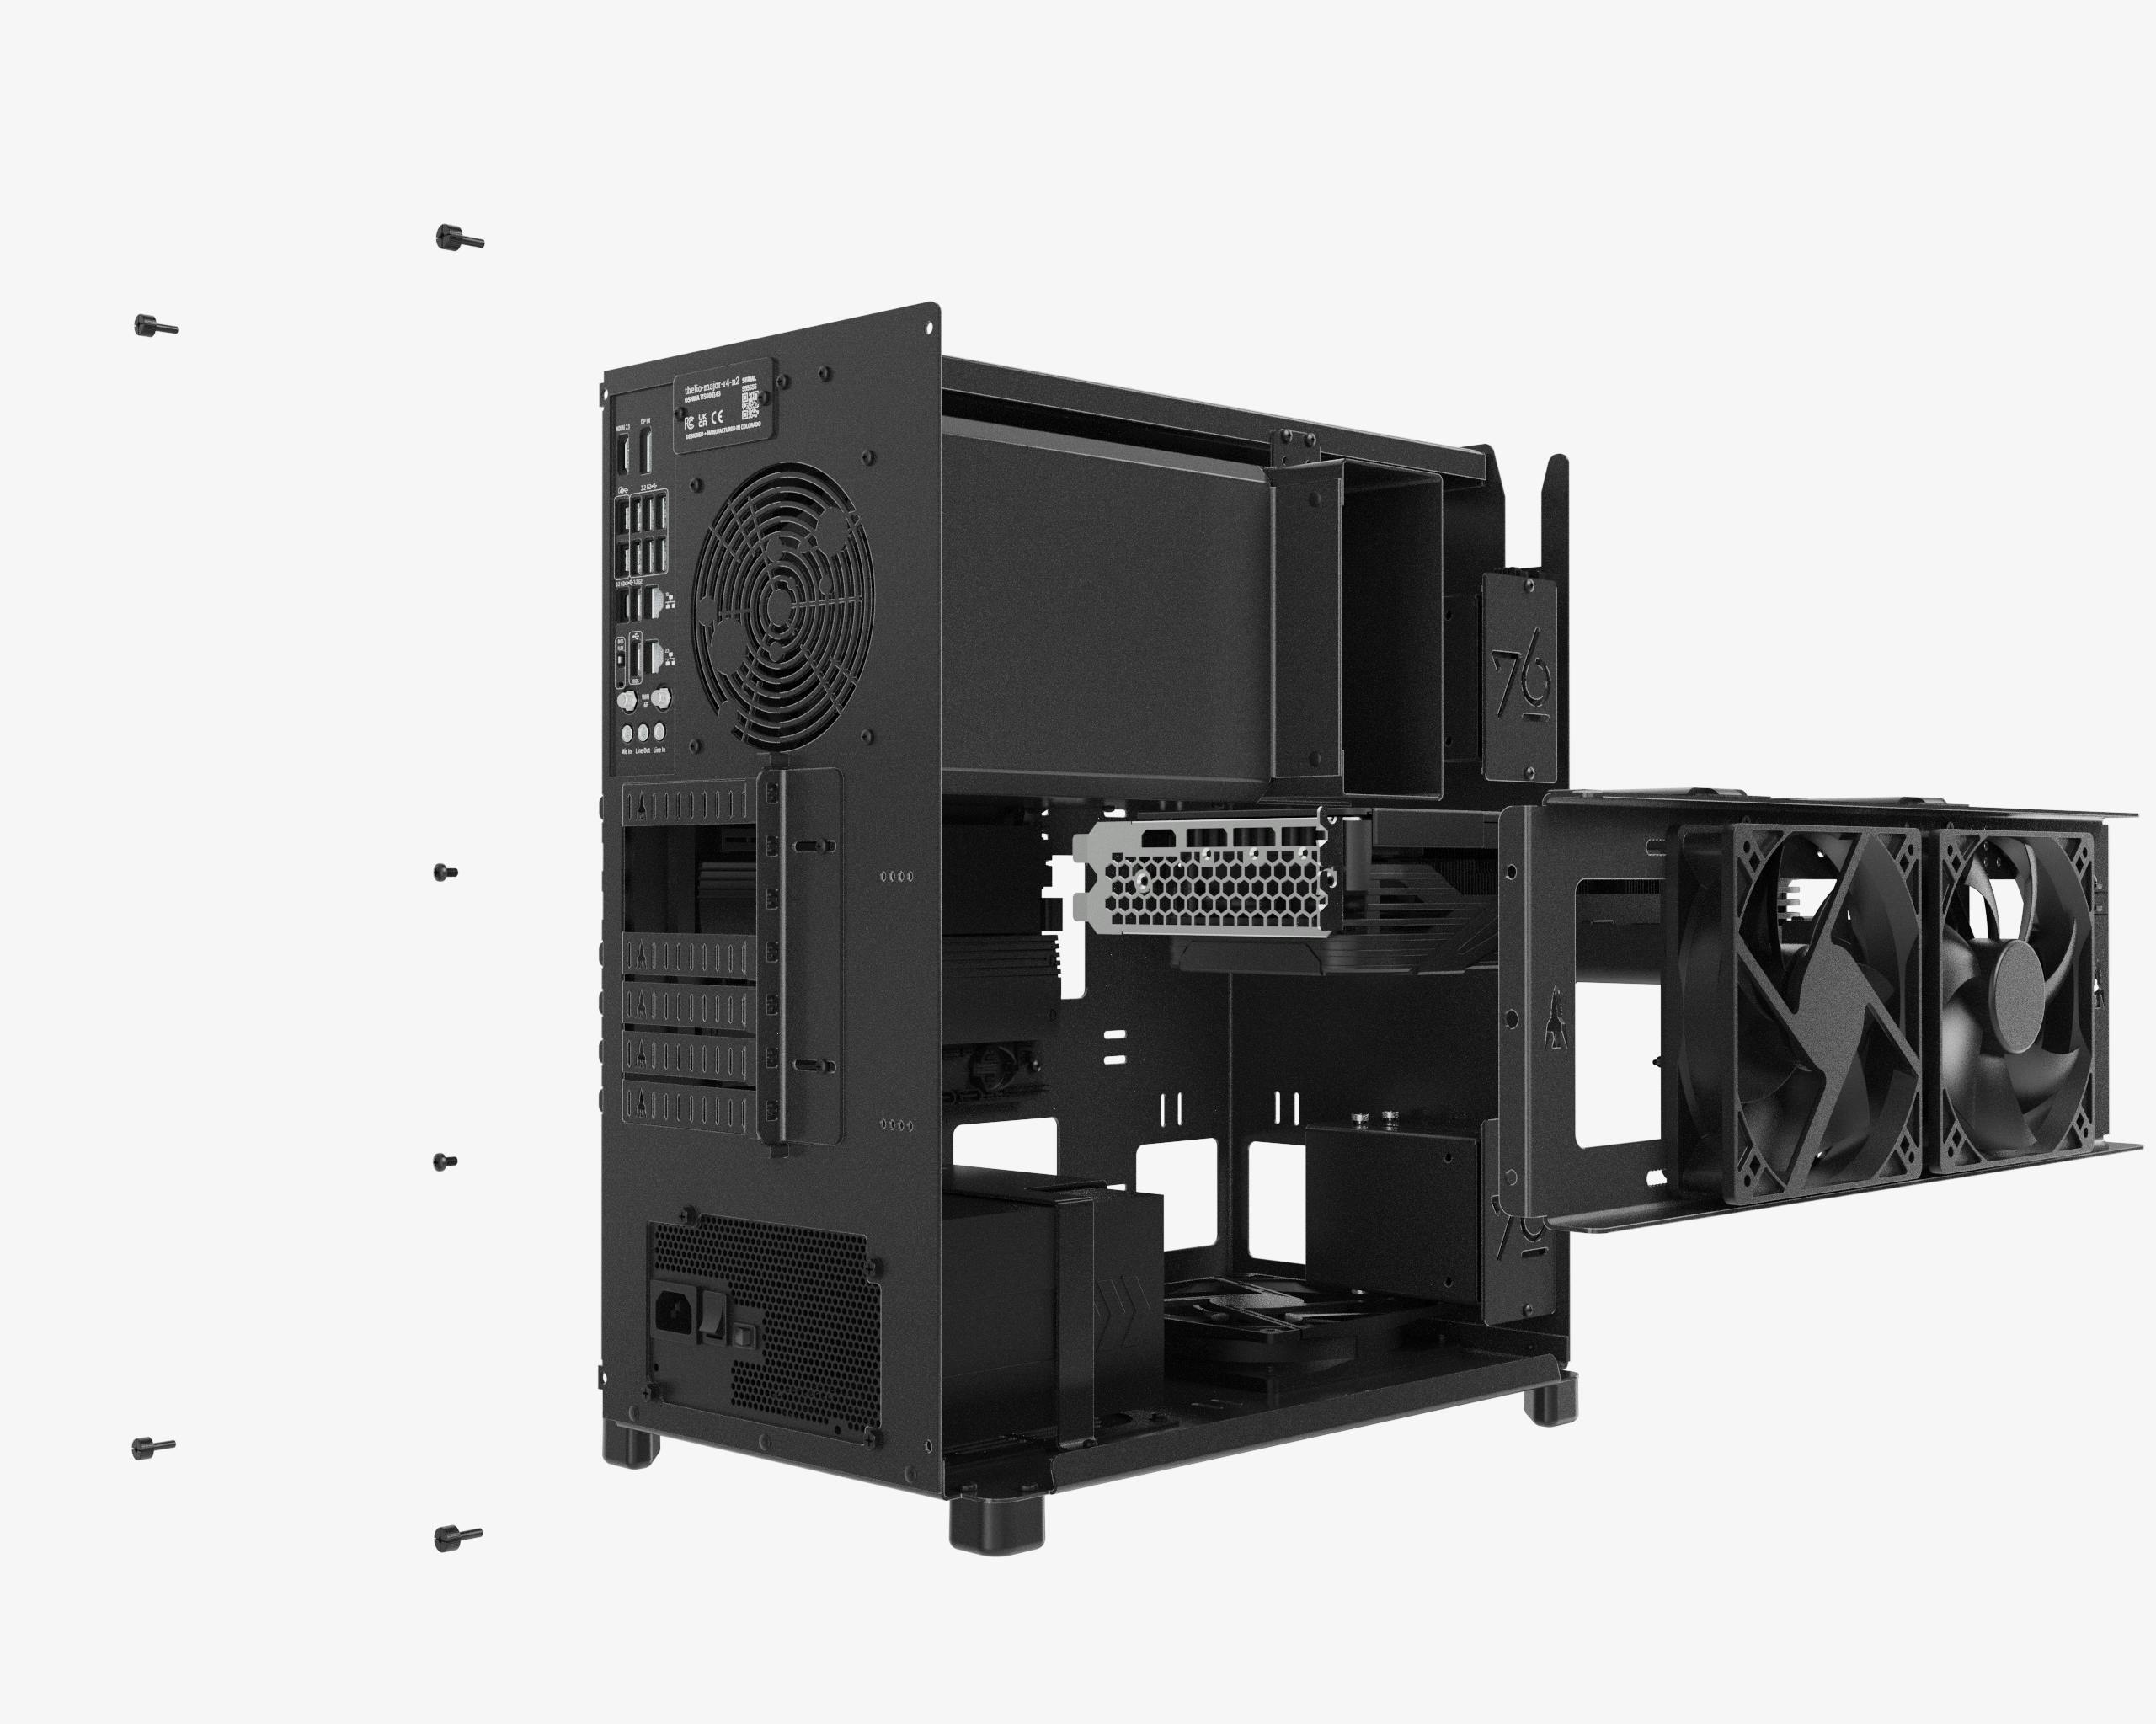 This gif shows the ease of repairability of the desktop. Removing the CPU cooling duct and GPU cooling brace give you access to swapping or upgrading components. Hot swap 2.5" storage drives can be swapped in seconds.